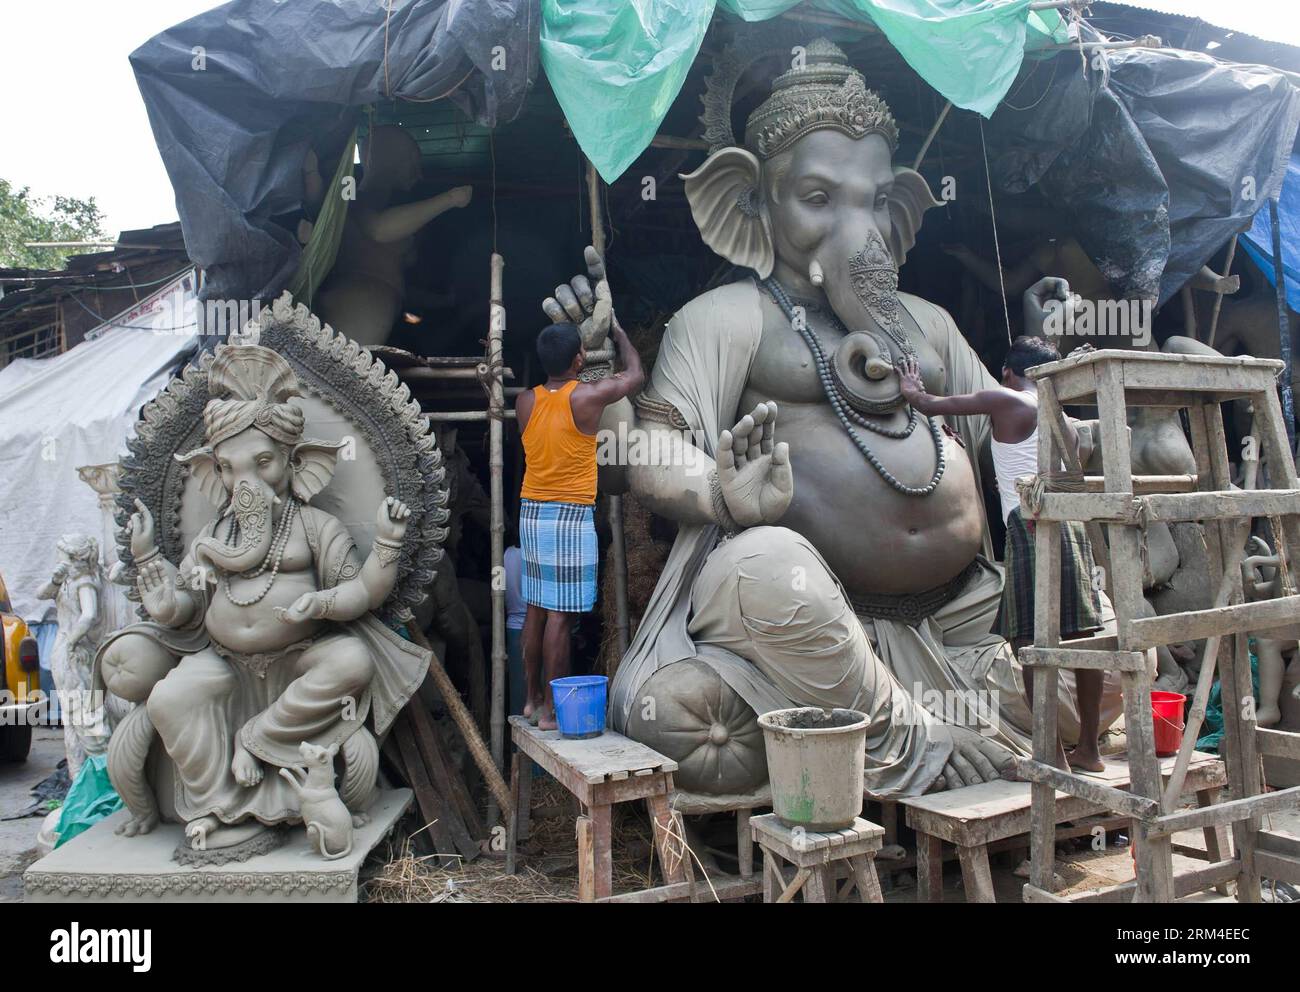 Bildnummer: 60444148  Datum: 05.09.2013  Copyright: imago/Xinhua An Indian artist works on an idol of elephant-headed Hindu God Ganesha ahead of Ganesh Chaturthi festival at a workshop in Calcutta, India, Sept. 5, 2013. Ganesh Chaturthi festival, which begins from Sept. 9, is celebrated as the birthday of Lord Ganesha who is widely worshiped by Hindus as the god of wisdom, prosperity and good fortune. (Xinhua/Tumpa Mondal)(zcc) INDIA-CALCUTTA-GANESHA CHATURTHI FESTIVAL-PREPARATION PUBLICATIONxNOTxINxCHN xns x0x 2013 quer     60444148 Date 05 09 2013 Copyright Imago XINHUA to Indian Artist Work Stock Photo